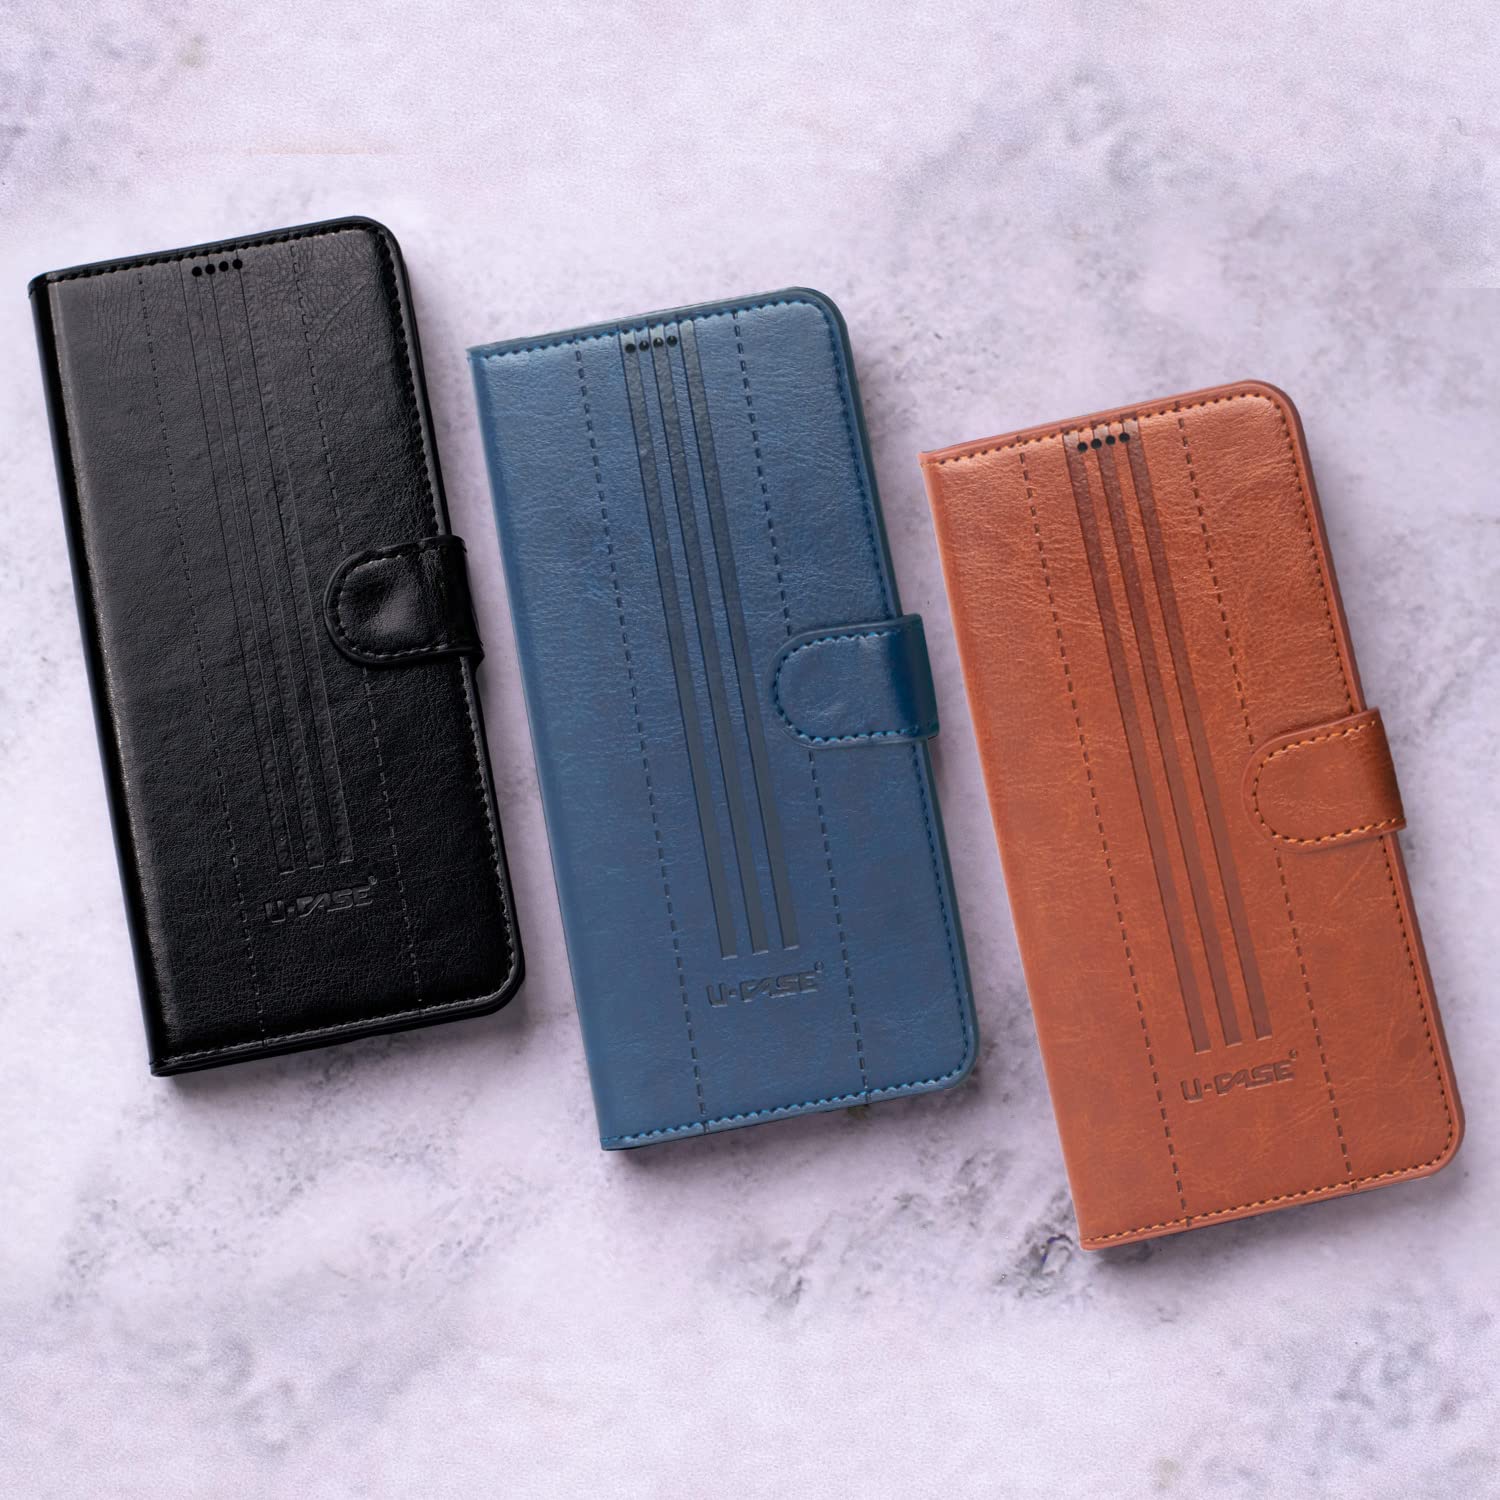 Shop U-CASE Flip Cover for Oppo A53 Vegan Foldable Stand & Pocket Magnetic Closure colors